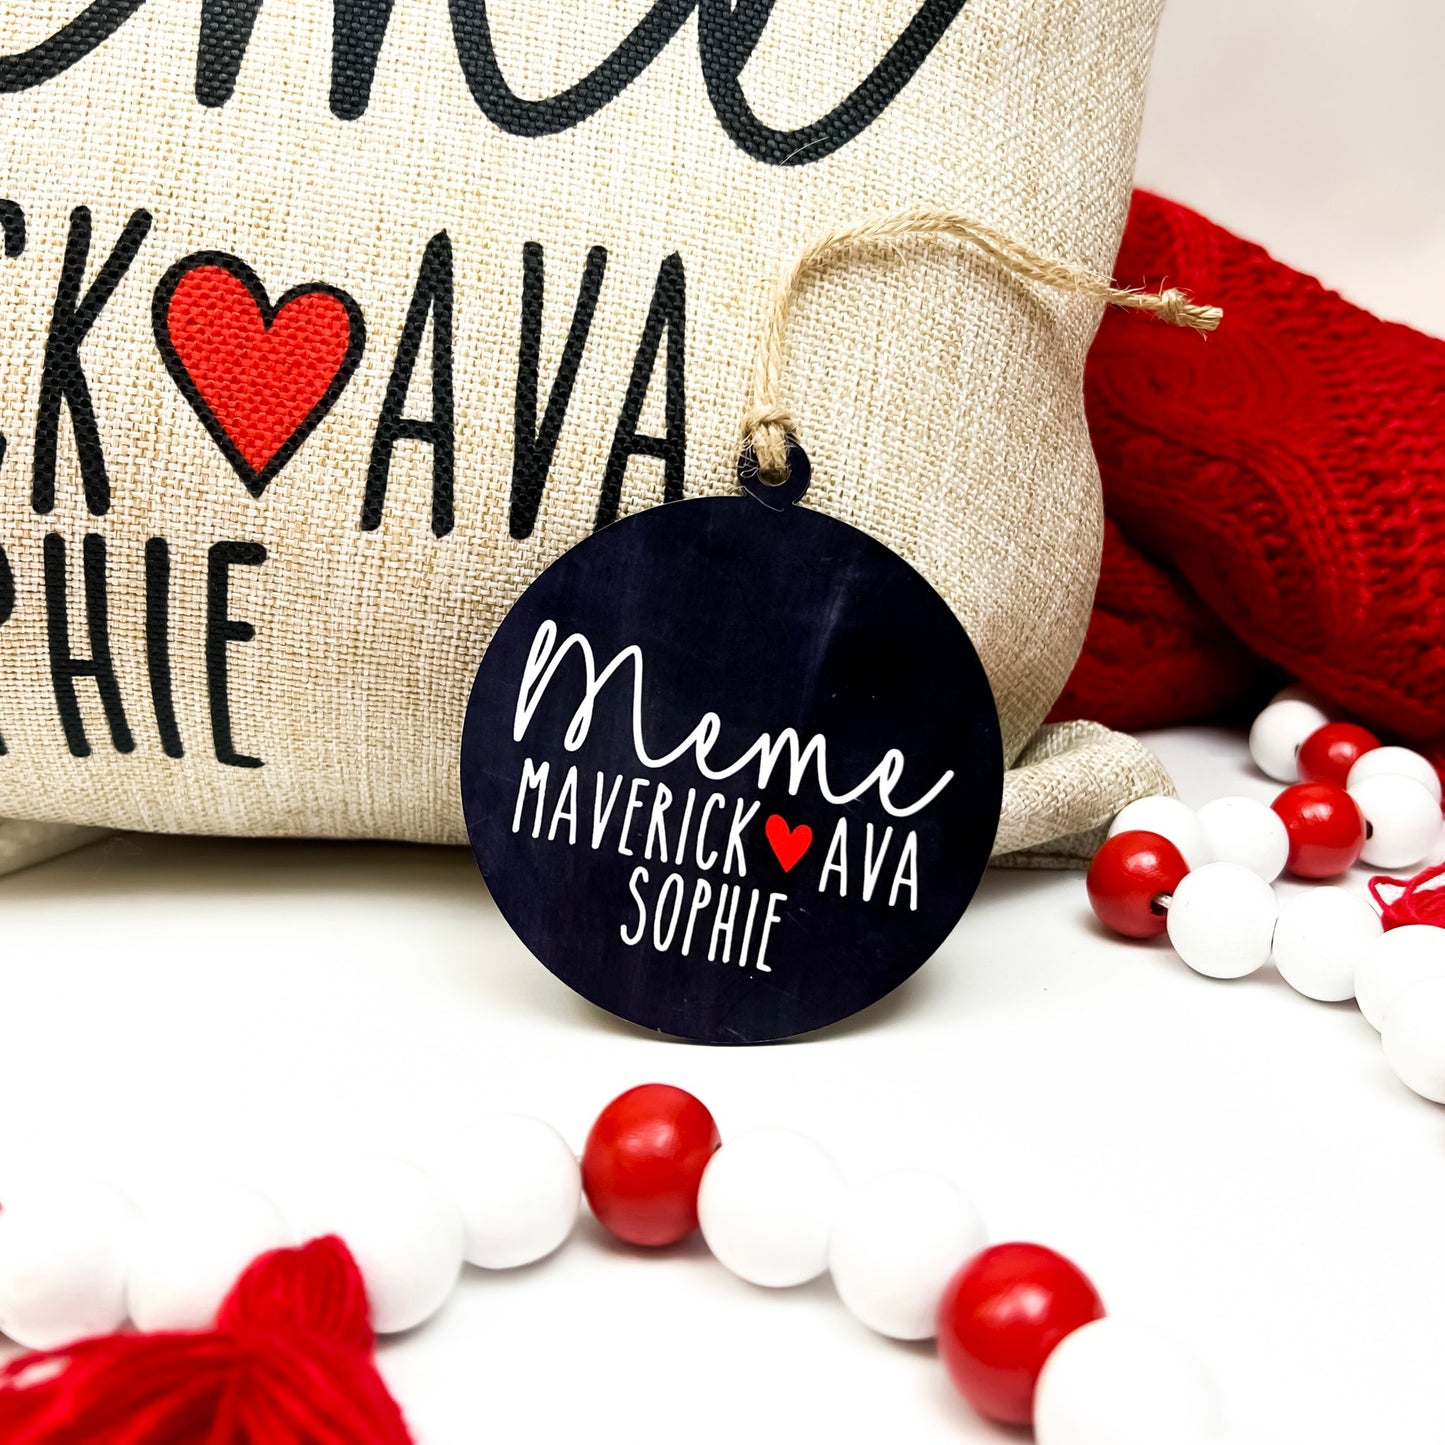 Lots of Love Personalized Pillow and Ornament Bundle